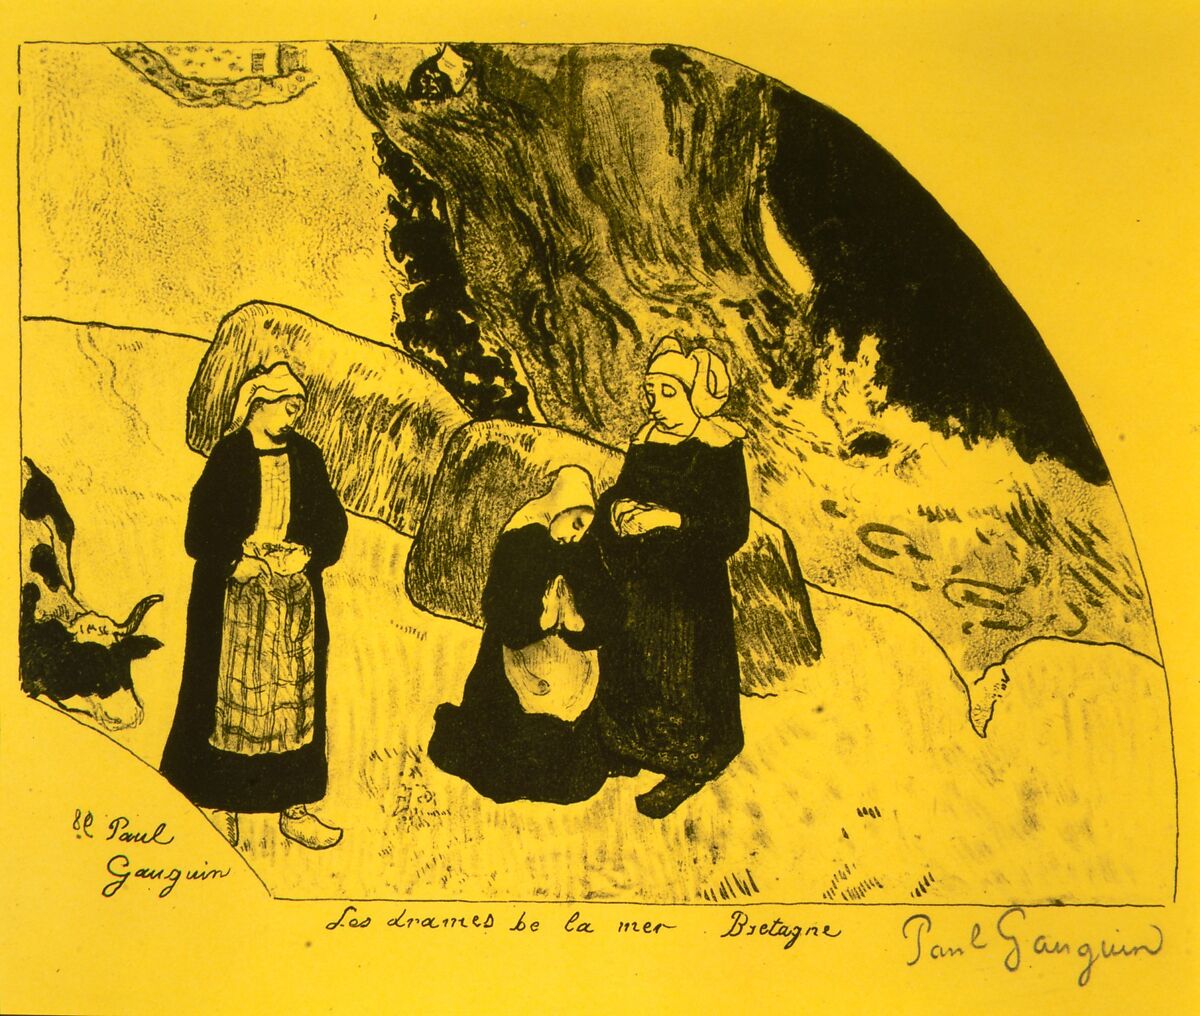 The Drama of the Sea, Brittany, from the Volpini Suite: Dessins lithographiques, Paul Gauguin (French, Paris 1848–1903 Atuona, Hiva Oa, Marquesas Islands), Zincograph on chrome yellow wove paper; first edition 